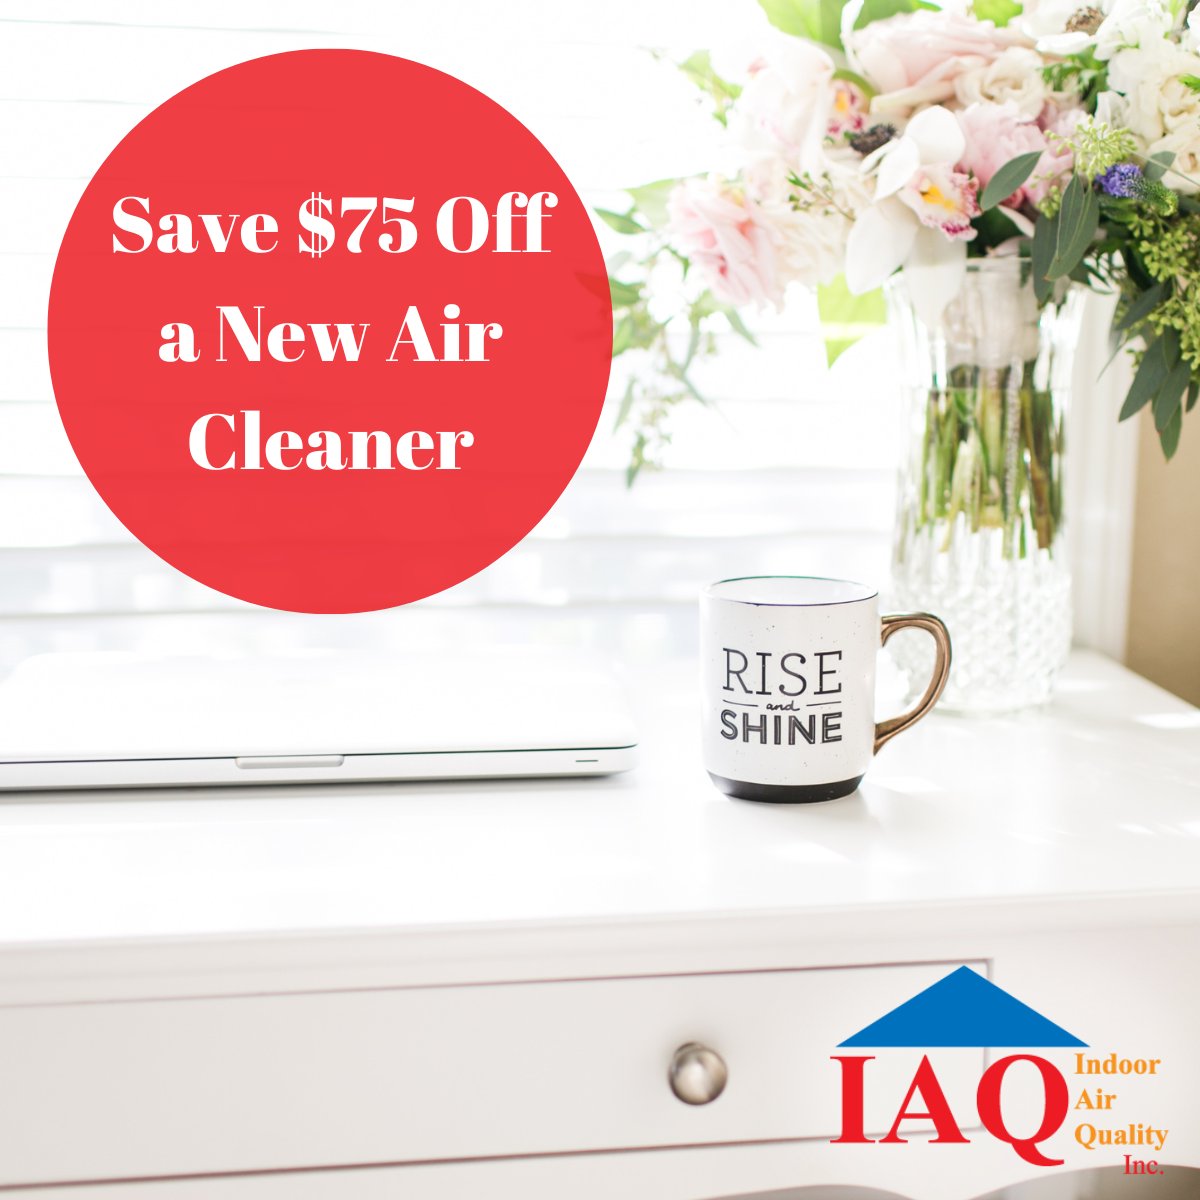 Save $75 Off a New Air Cleaner

Protect your home from allergens and dust with a new air purifier. It will eliminate up to 99% of airborne particles in your home.

Contact us to learn more. 

#HVACcontractors #HVACexperts #HVACcolorado